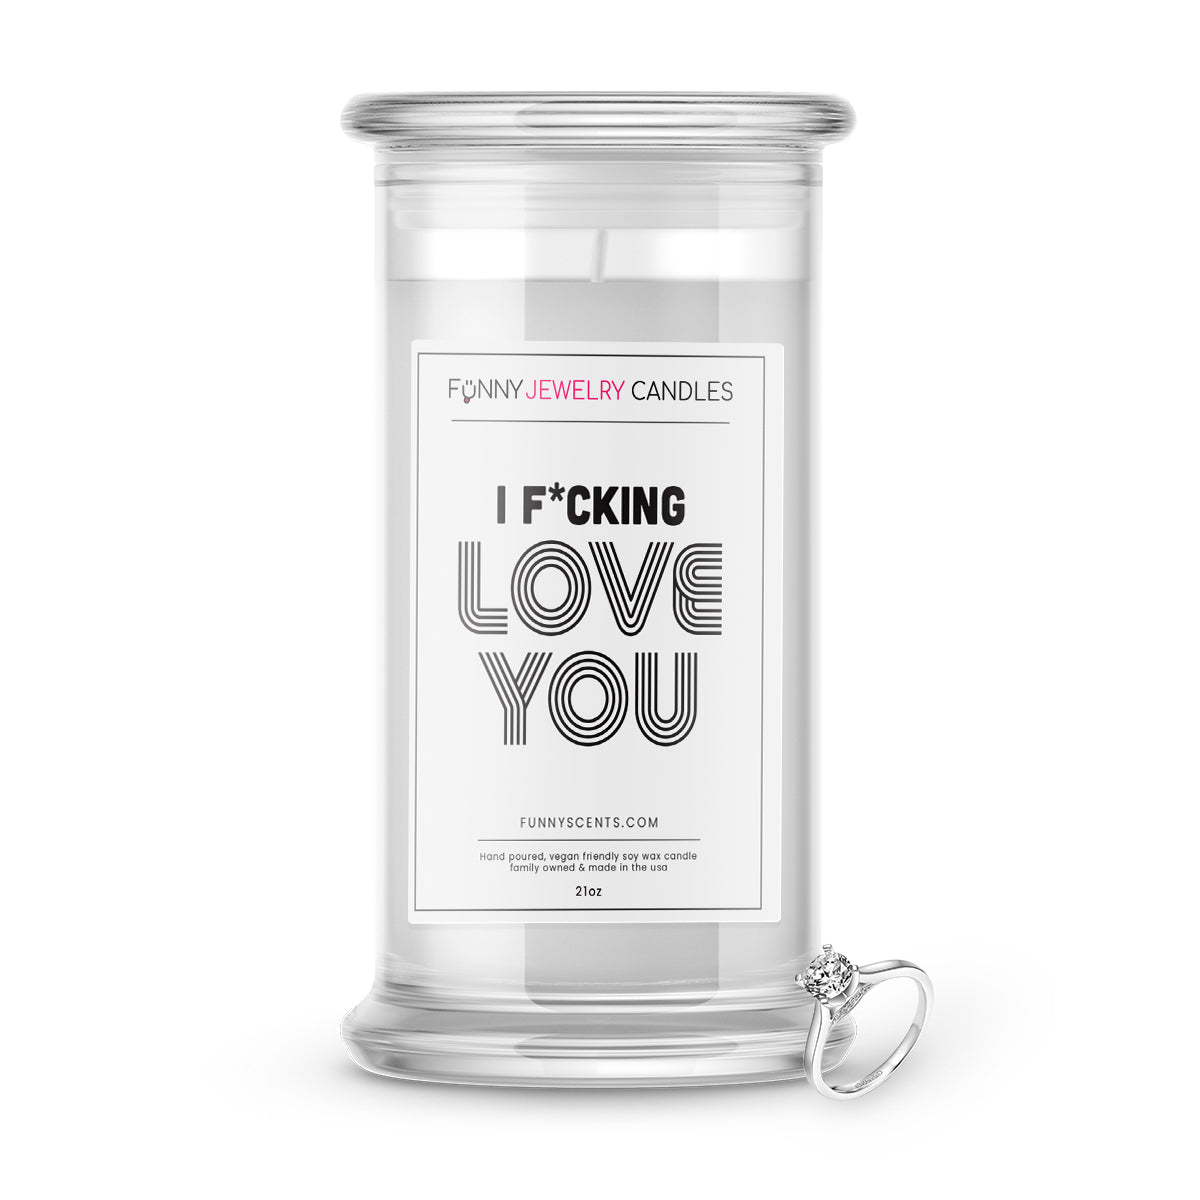 I F*cking Love You Jewelry Funny Candles